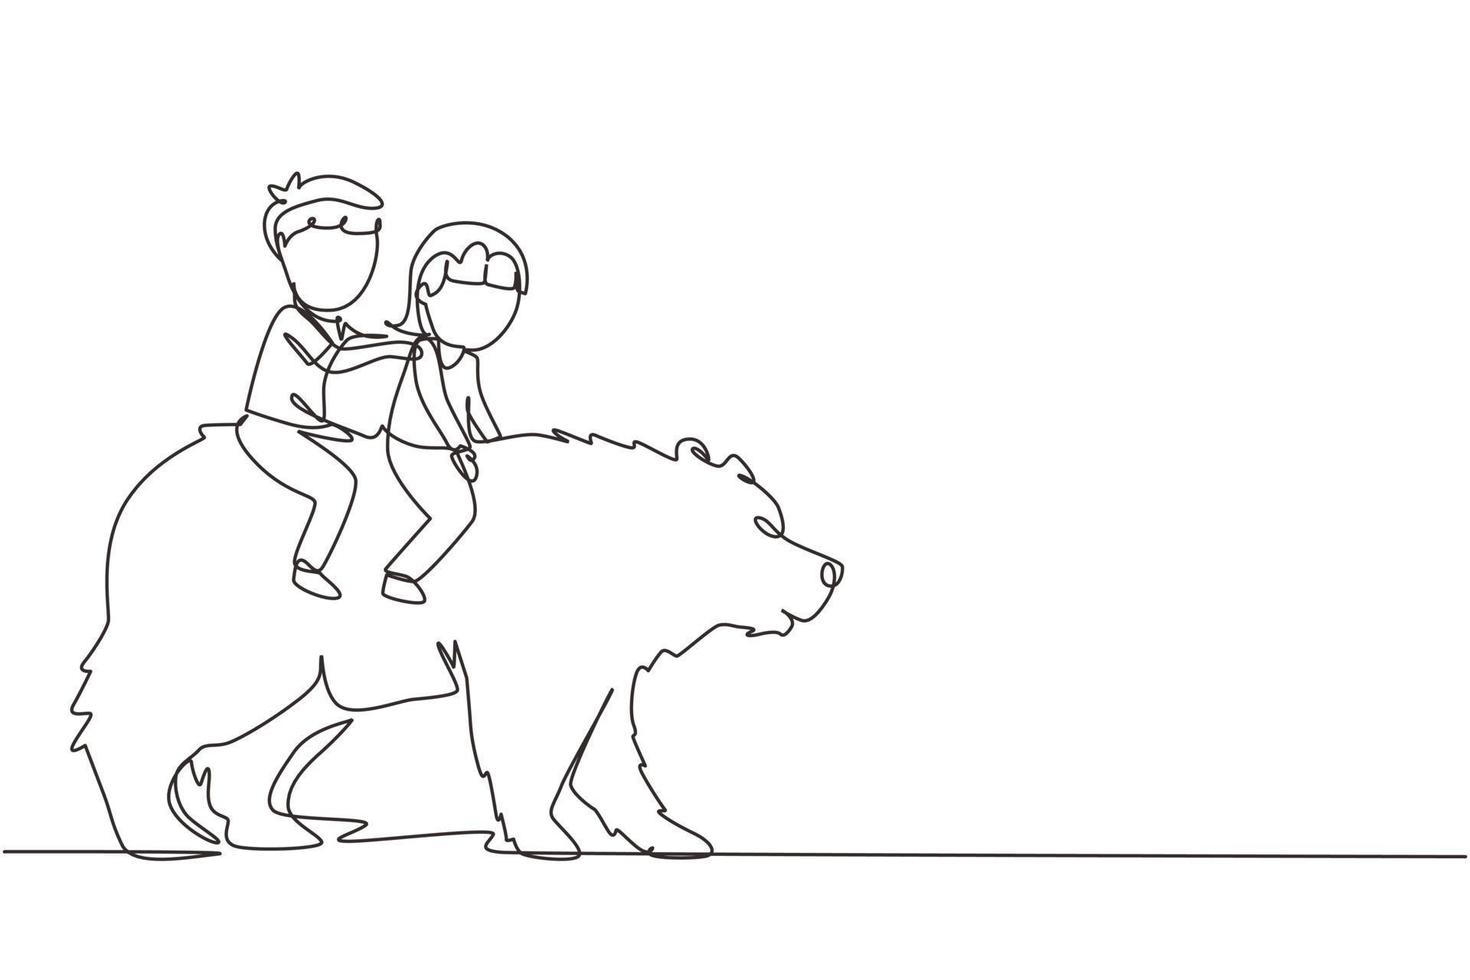 Continuous one line drawing happy boy and girl riding brown grizzly bear together. Children sitting on back big bear at circus event. Kids learning to ride beast animal. Single line draw design vector